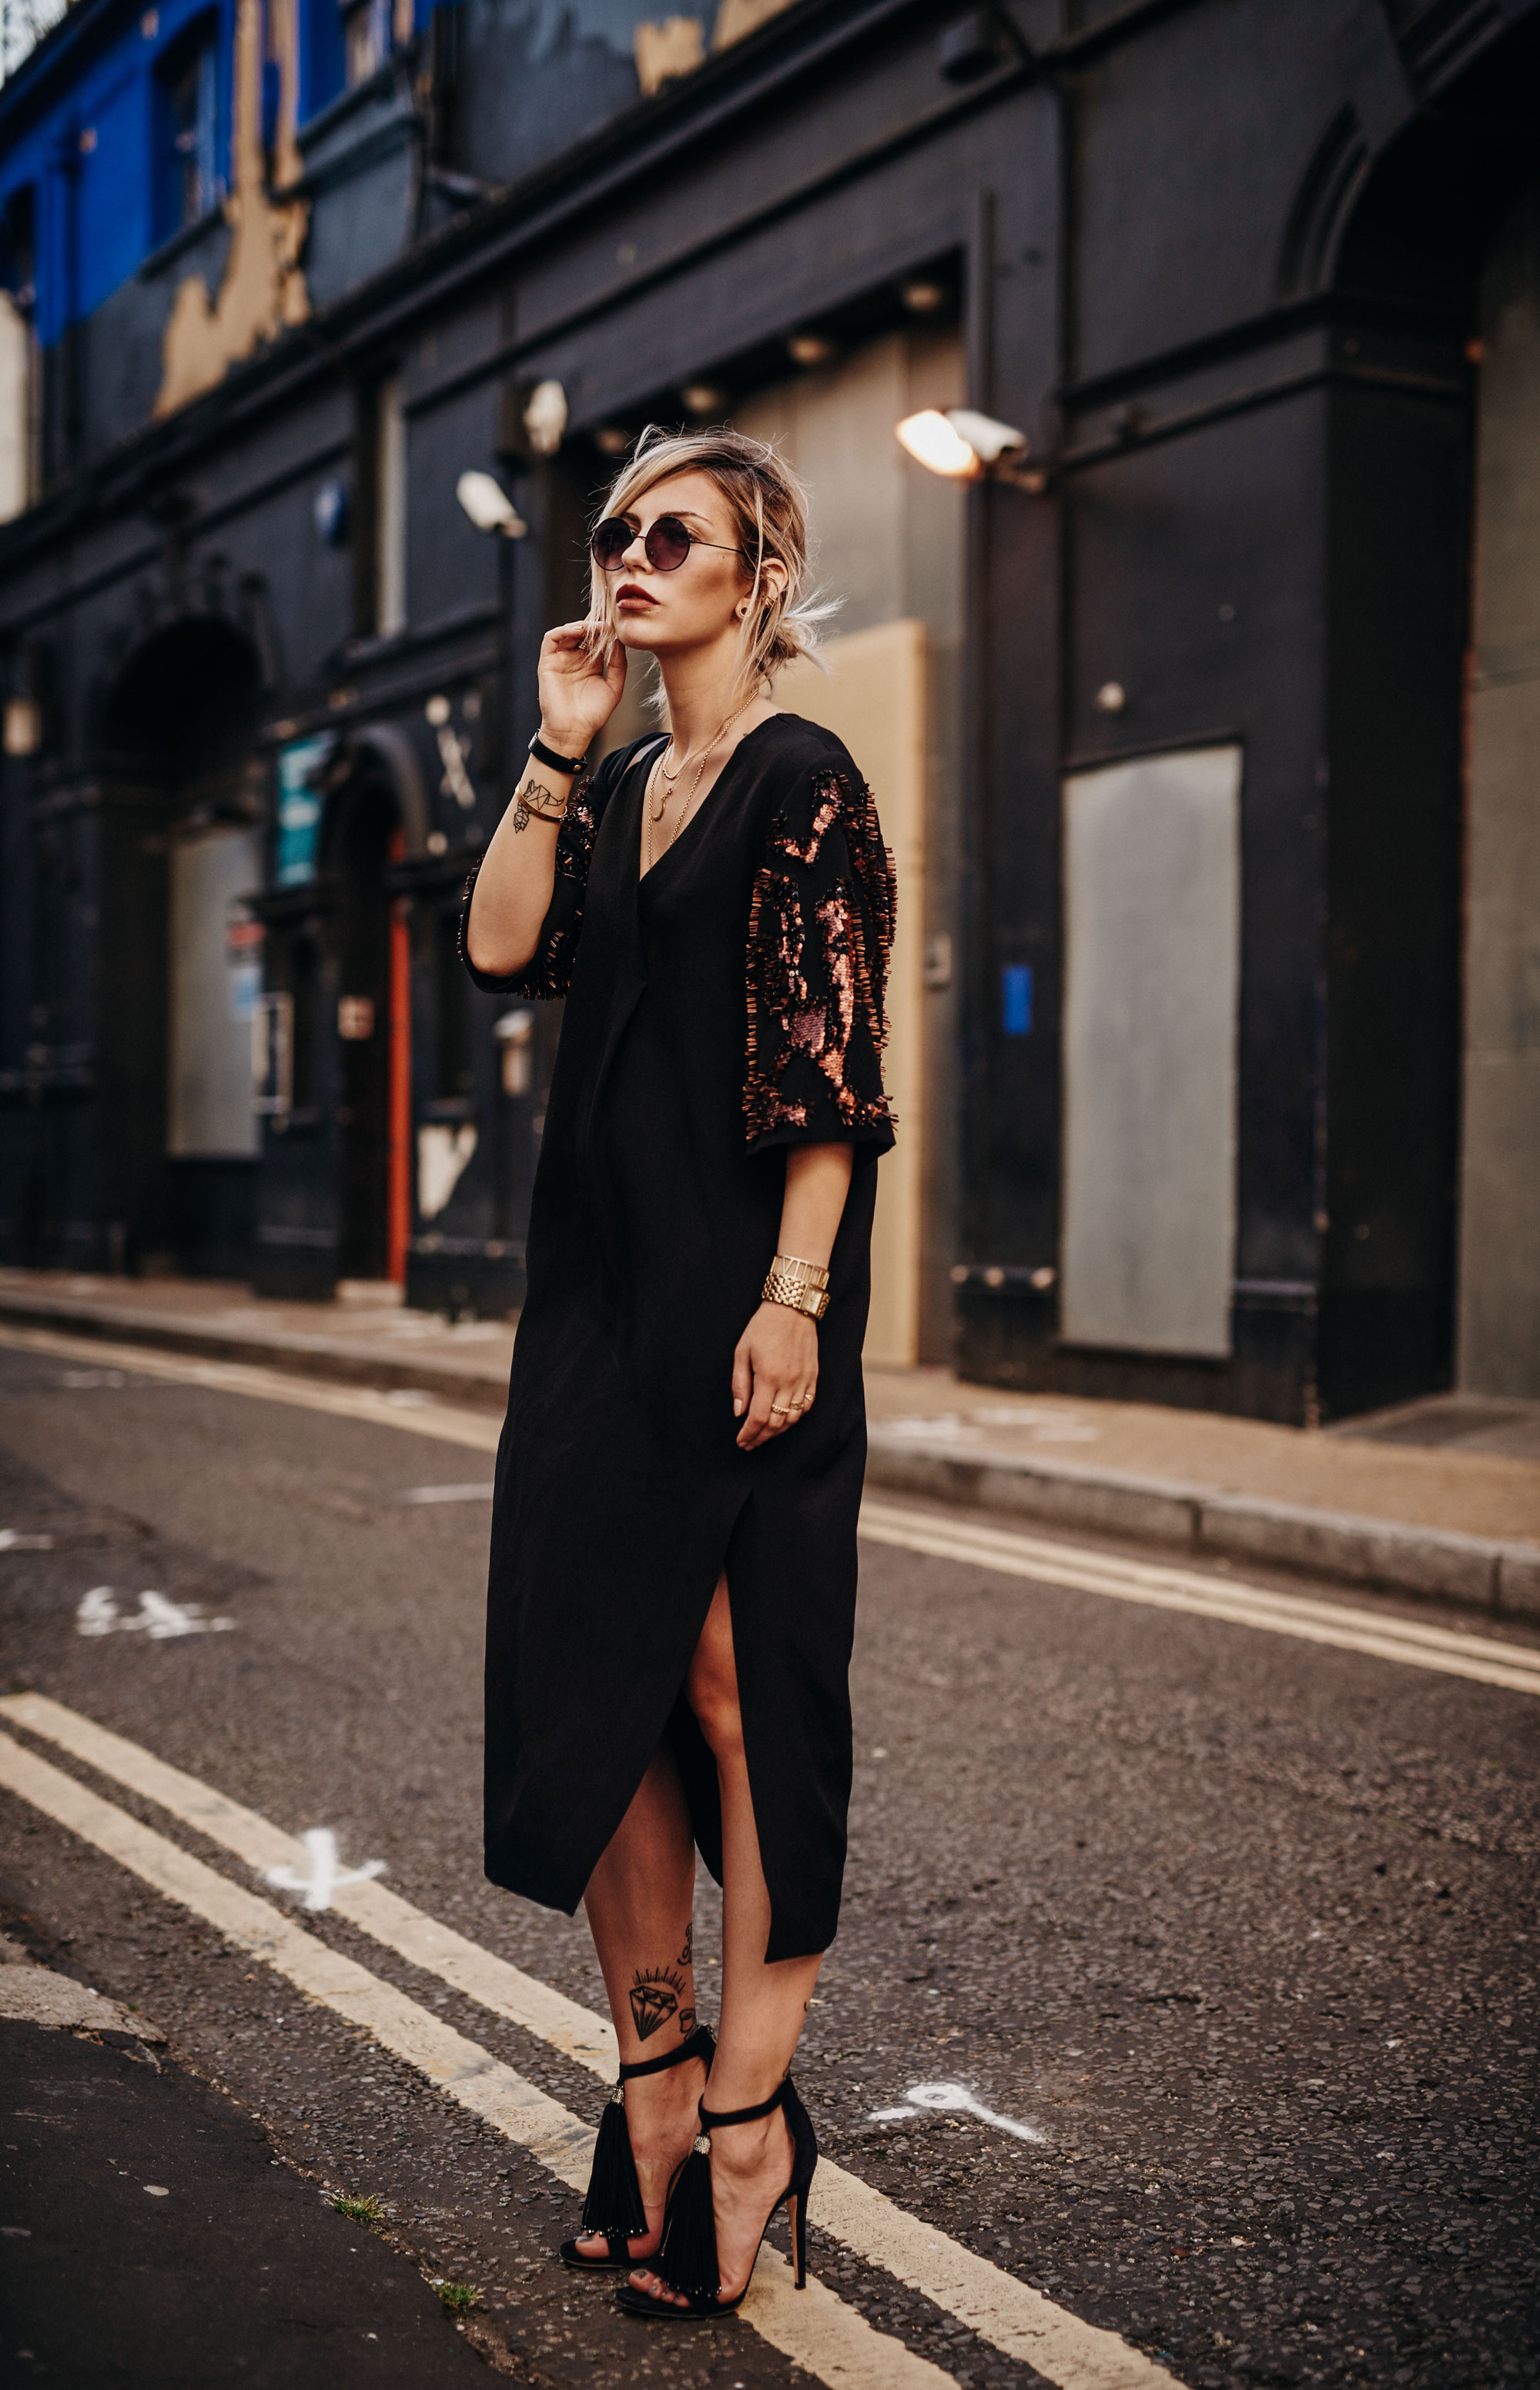 black maxi dress | dress: By Malene Birger | style: casual, chic, edgy | London